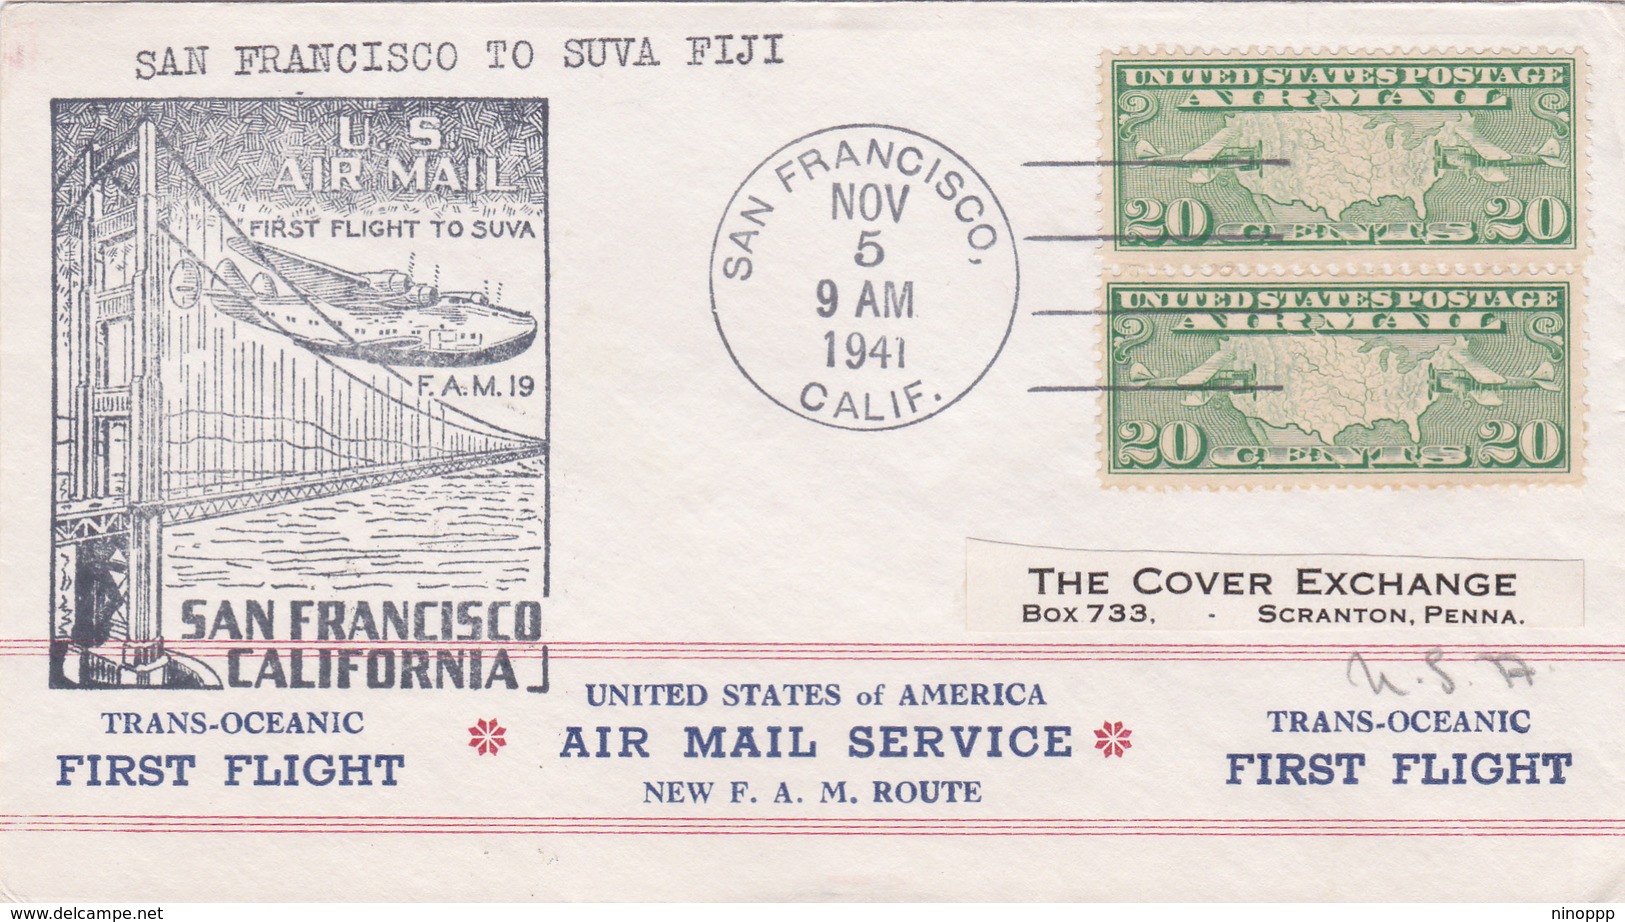 United States 1941 First Flight F.M.19 San Francisco To Suva Fiji, Souvenir Cover - Covers & Documents